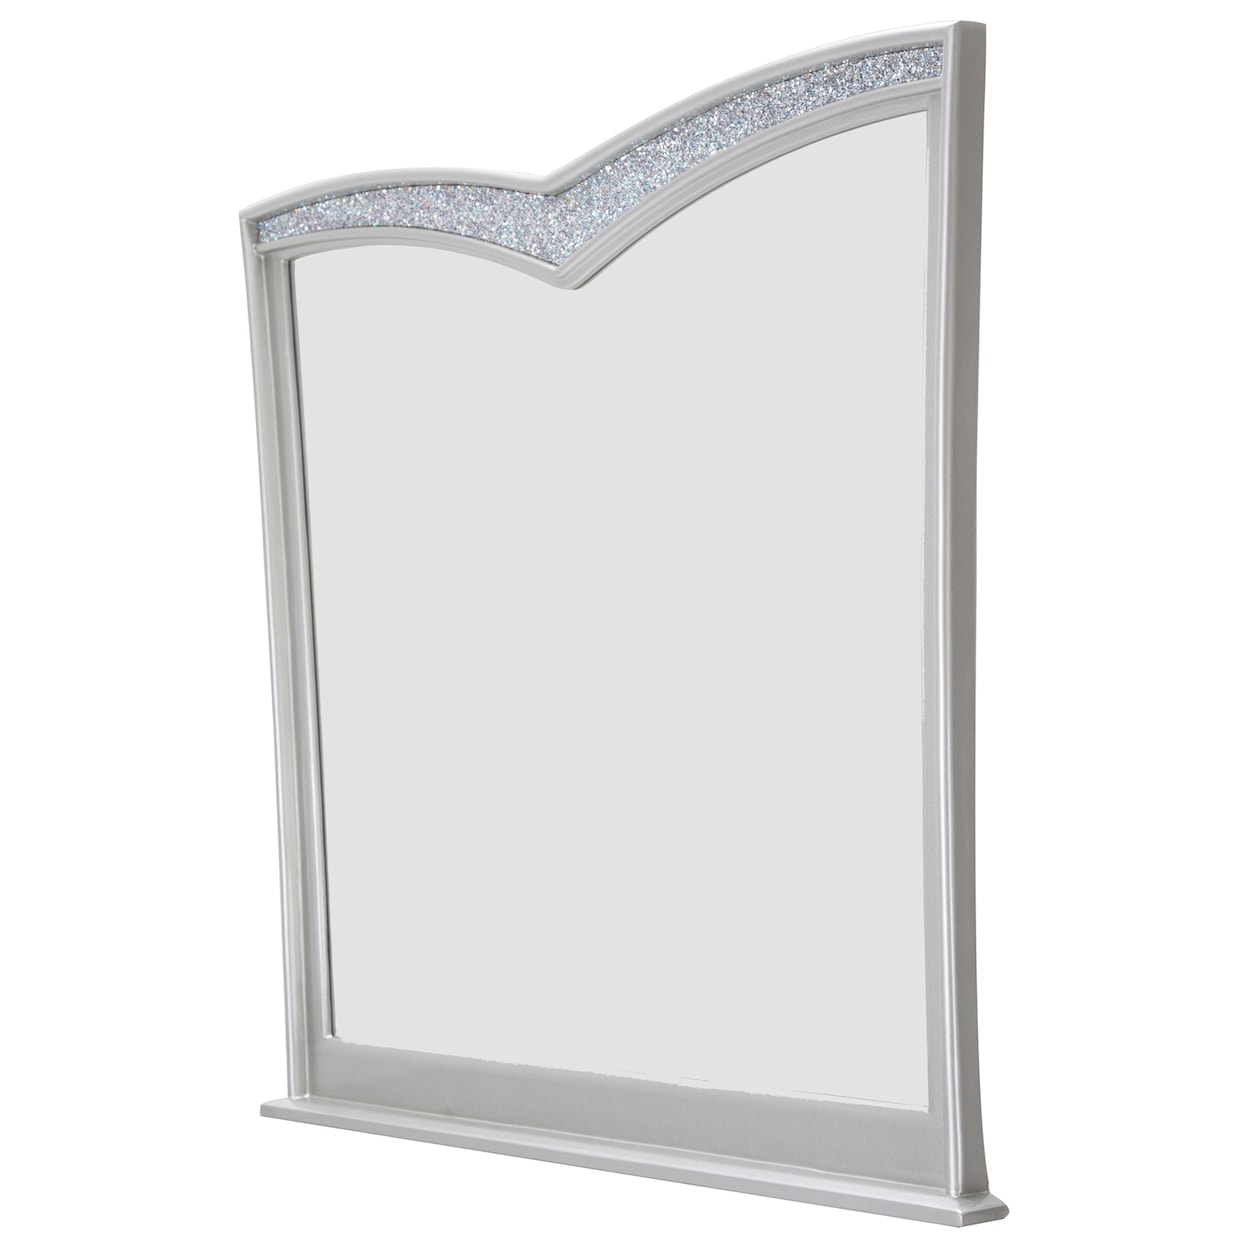 Michael Amini Melrose Plaza Mirror (For Dresser and Sideboard)